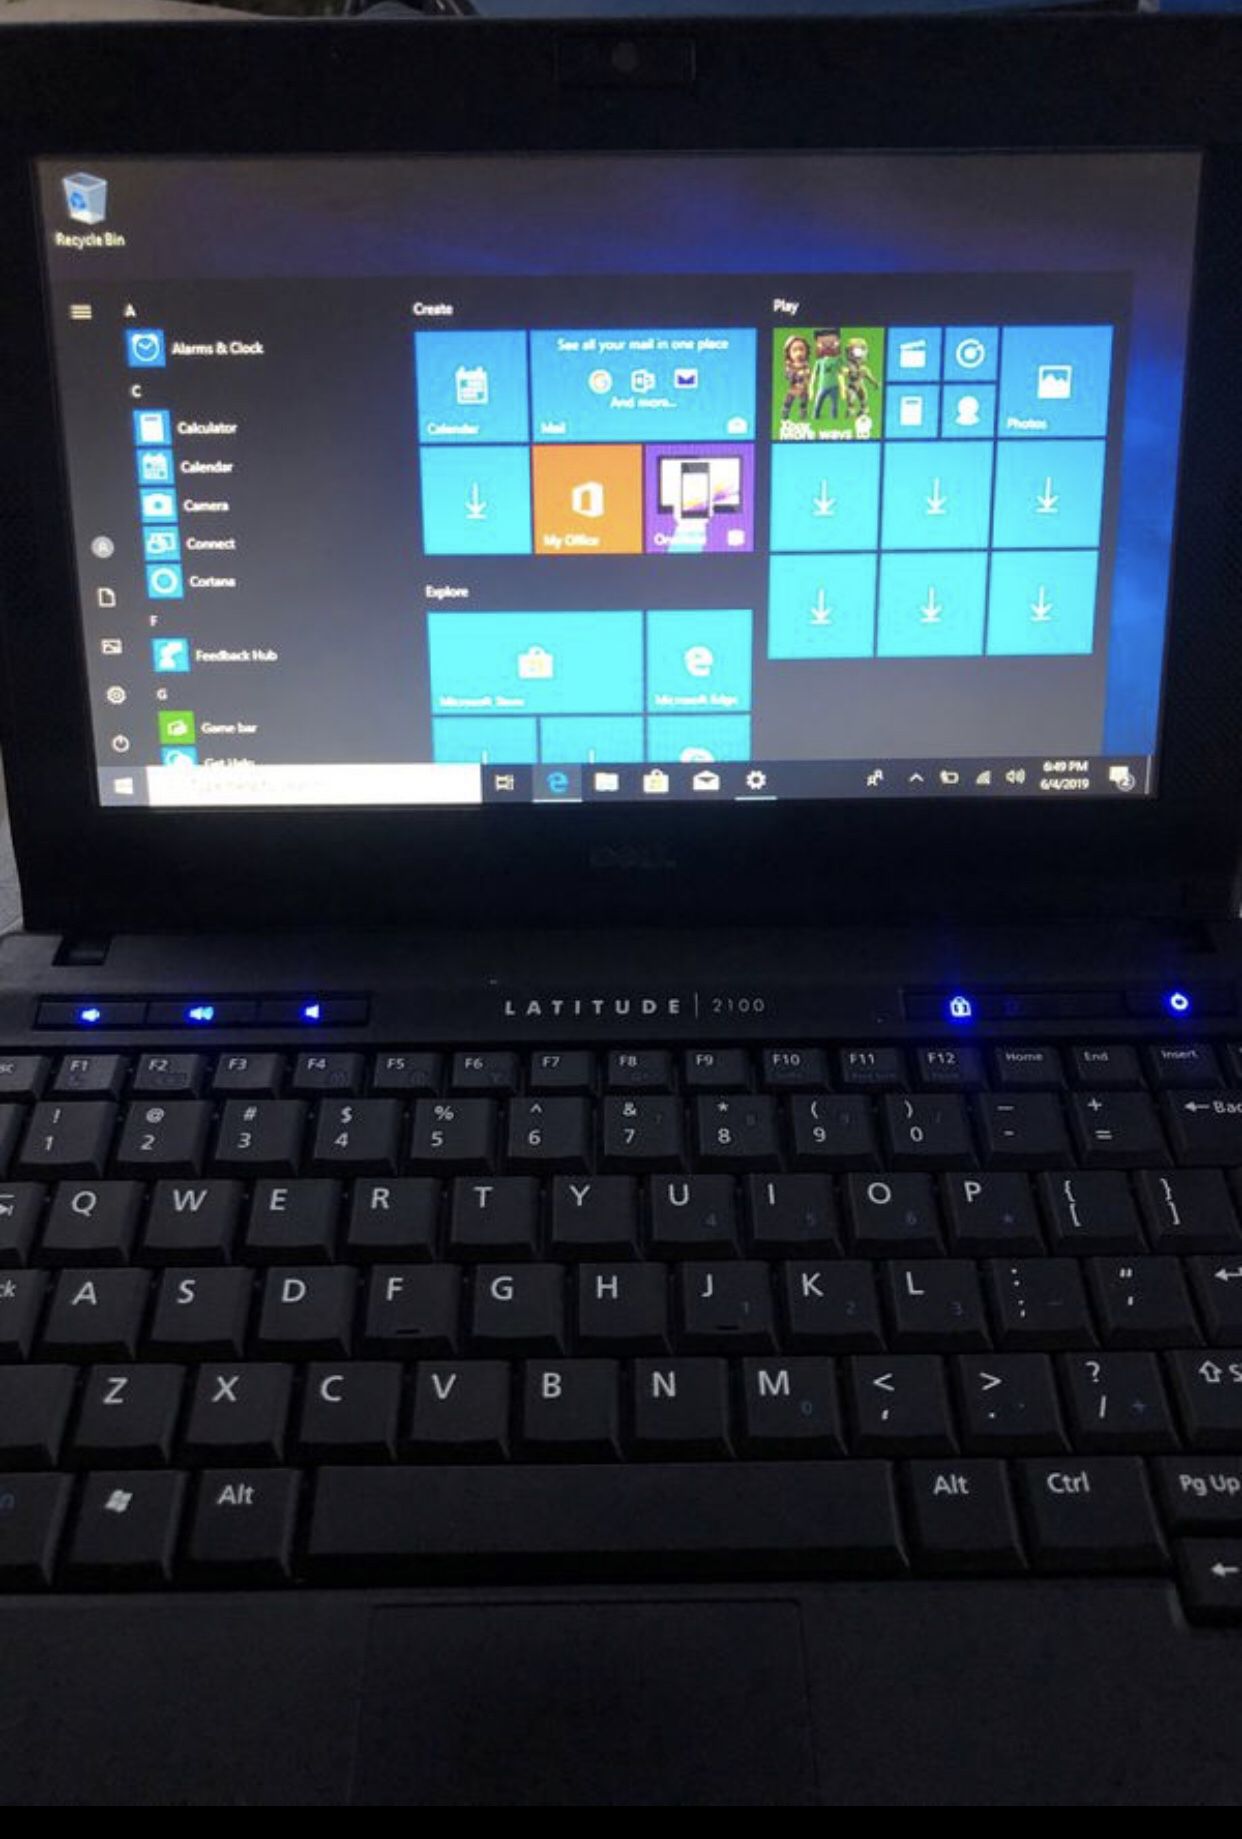 Small Dell laptop, touch screen, WiFi, windows 10, great for internet browsing